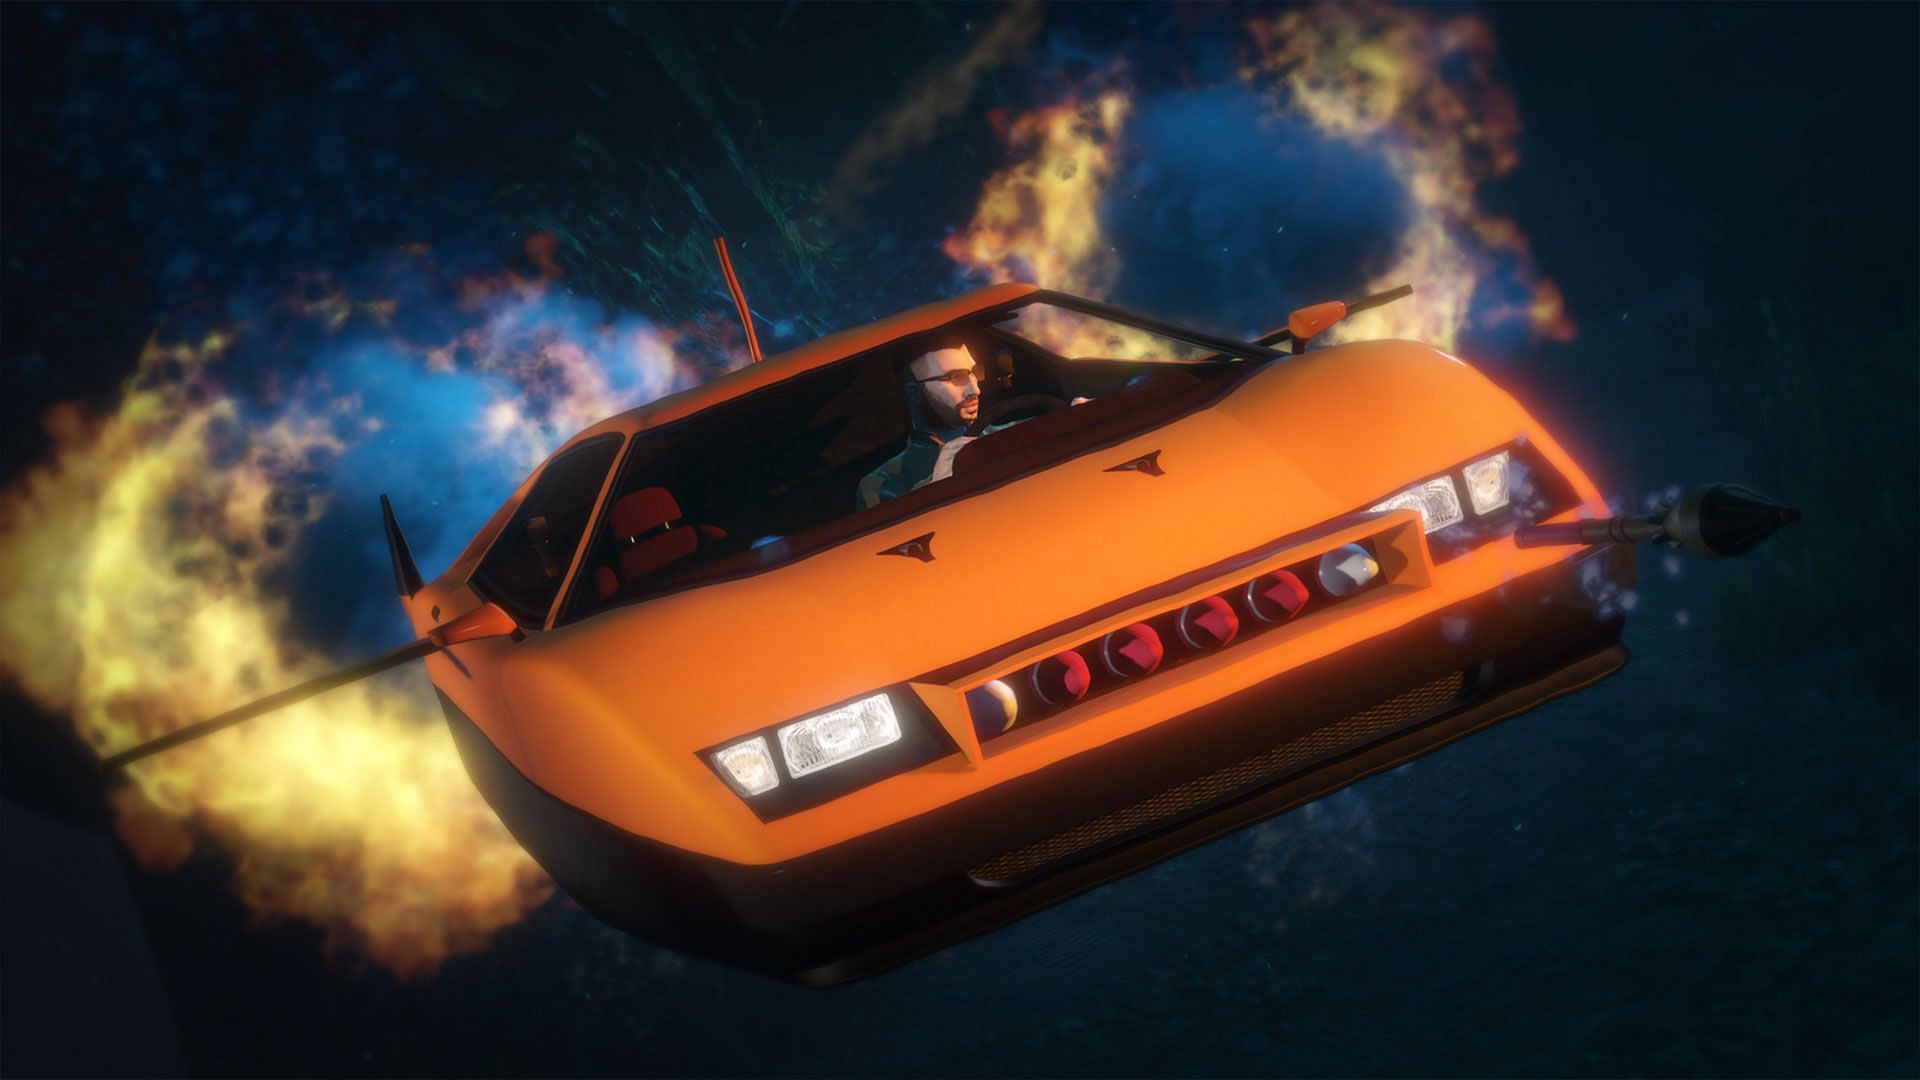 One of the very few cars that can go underwater in GTA Online (Image via Rockstar Games)